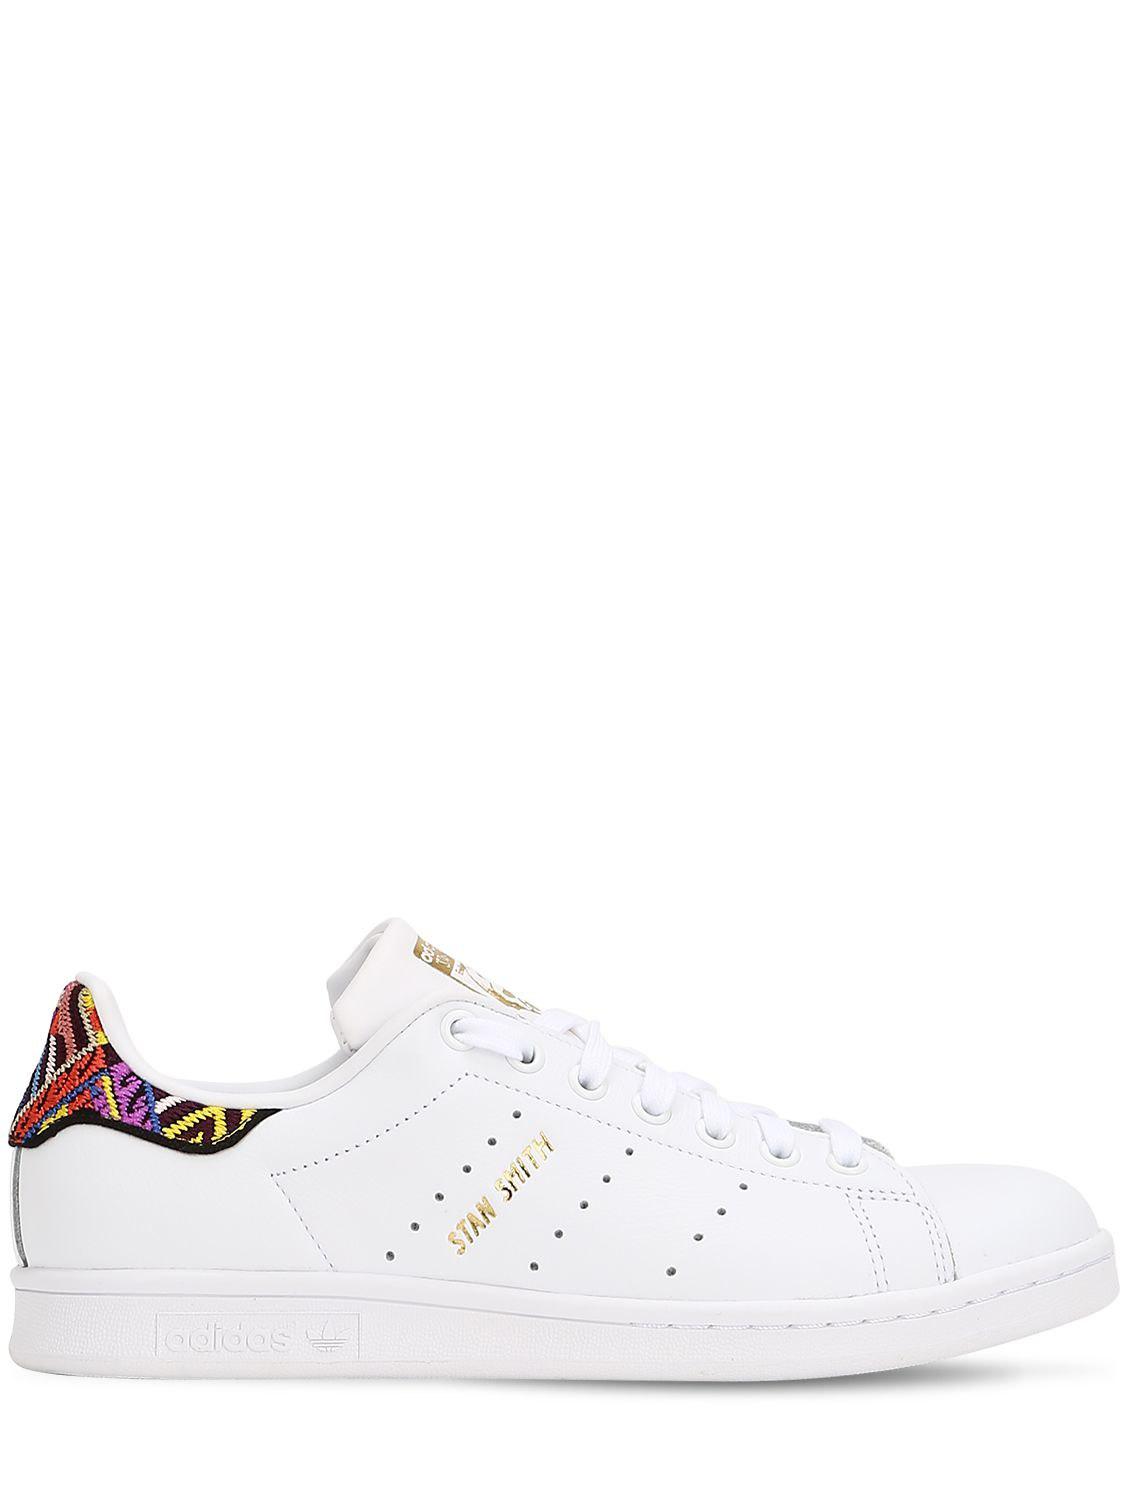 Stan Smith Azteque Cheapest Prices, 40% OFF | qlobal.az